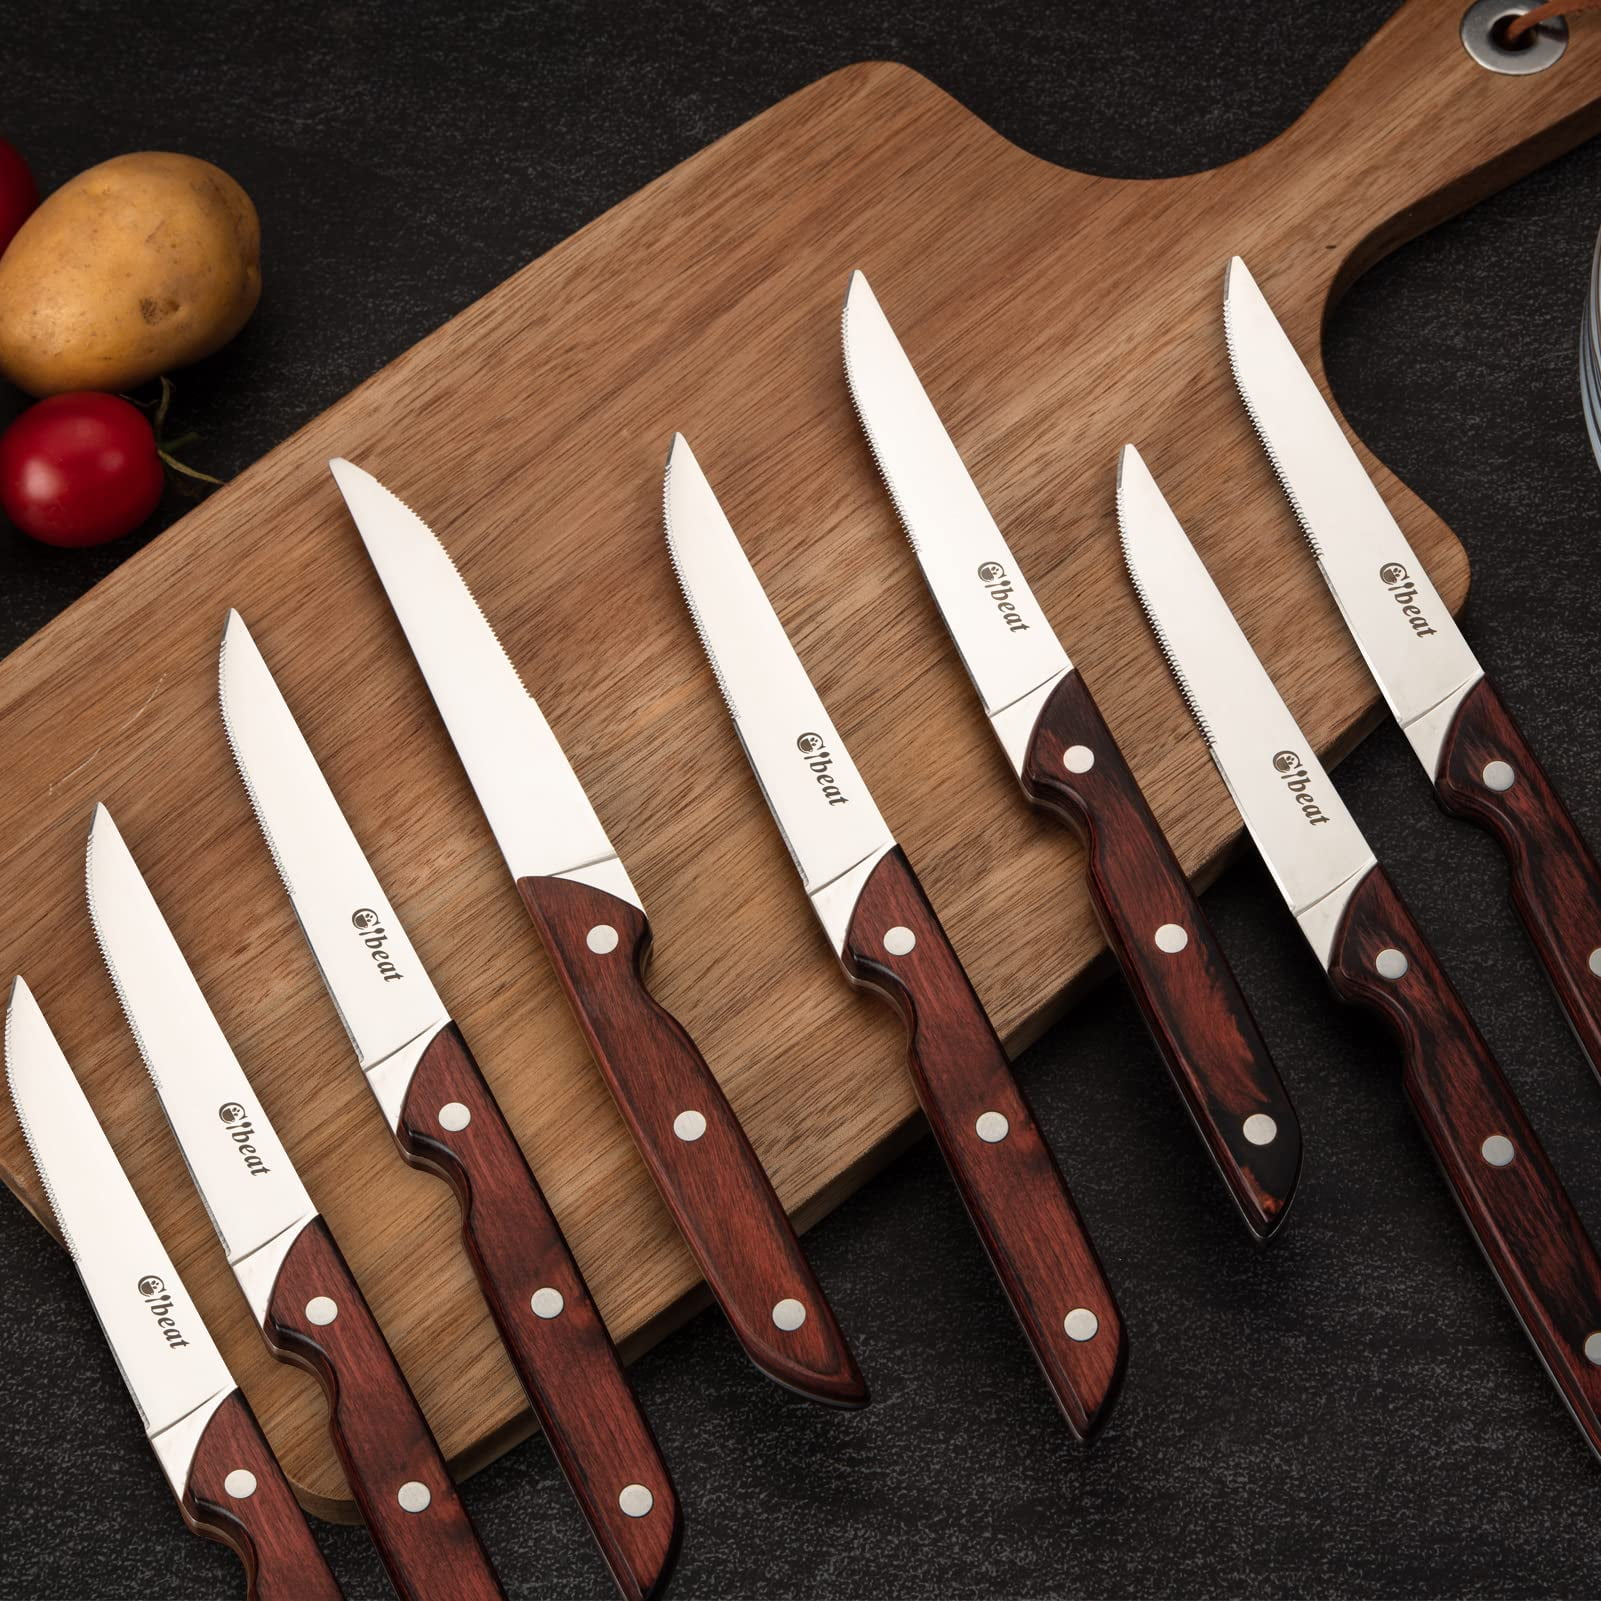  Steak Knives Set of 4, 5 Inch High-Carbon Stainless Steel Non-serrated  Steak Knife, 4 Pieces Professional Straight Edge Kitchen Table Dinner Knives  - Full Tang Ergonomic Handle: Home & Kitchen